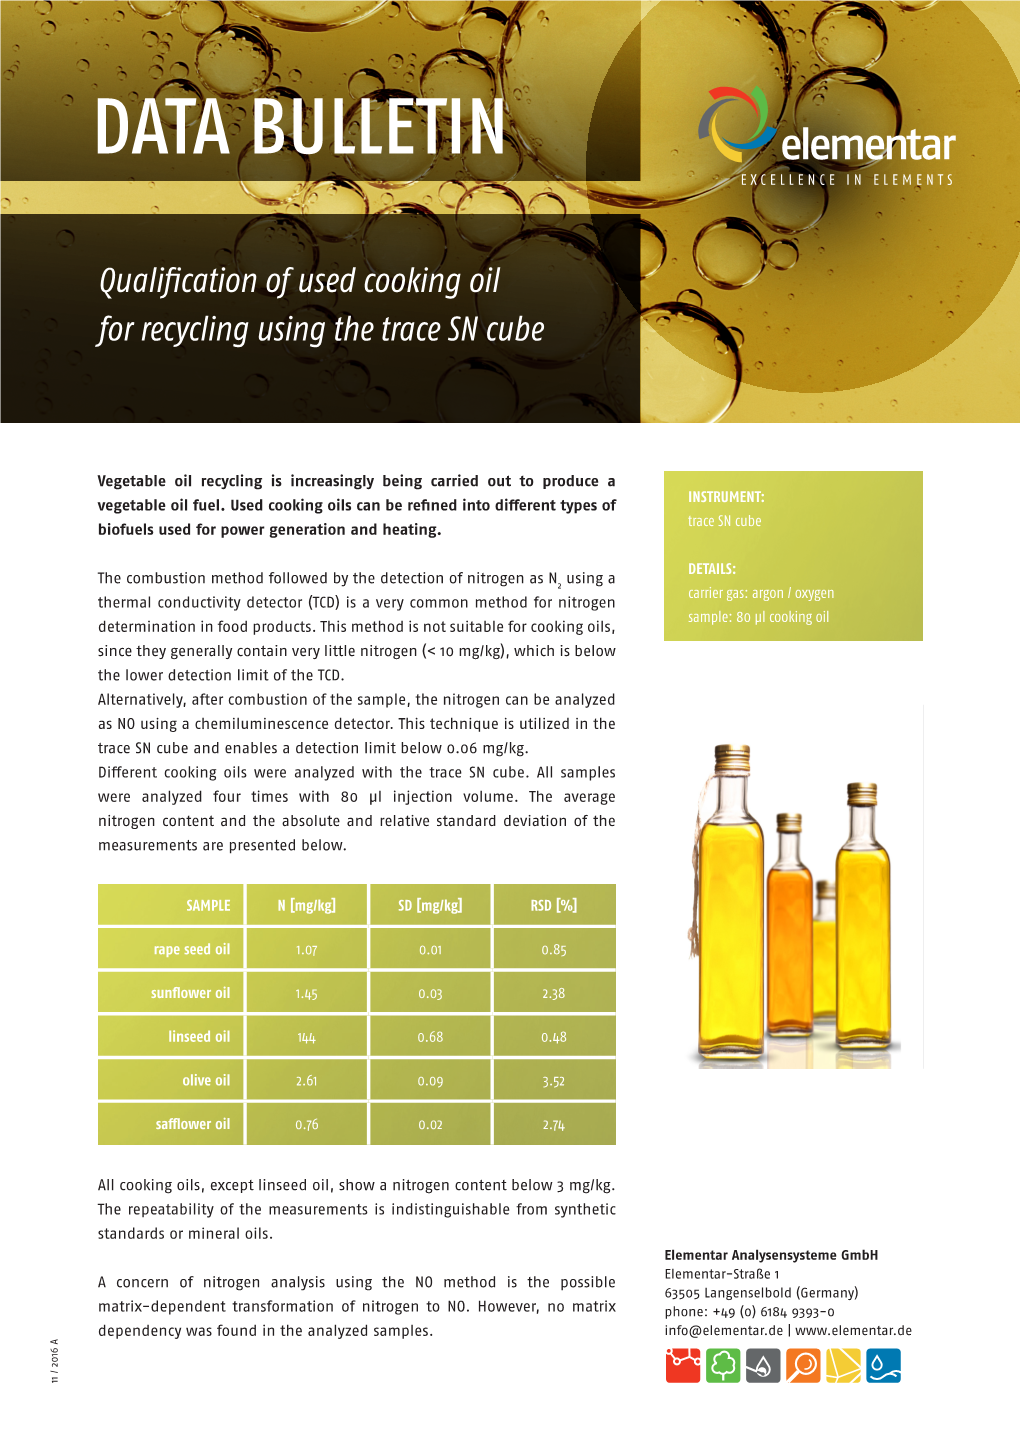 Qualification of Used Cooking Oil for Recycling Using the Trace SN Cube